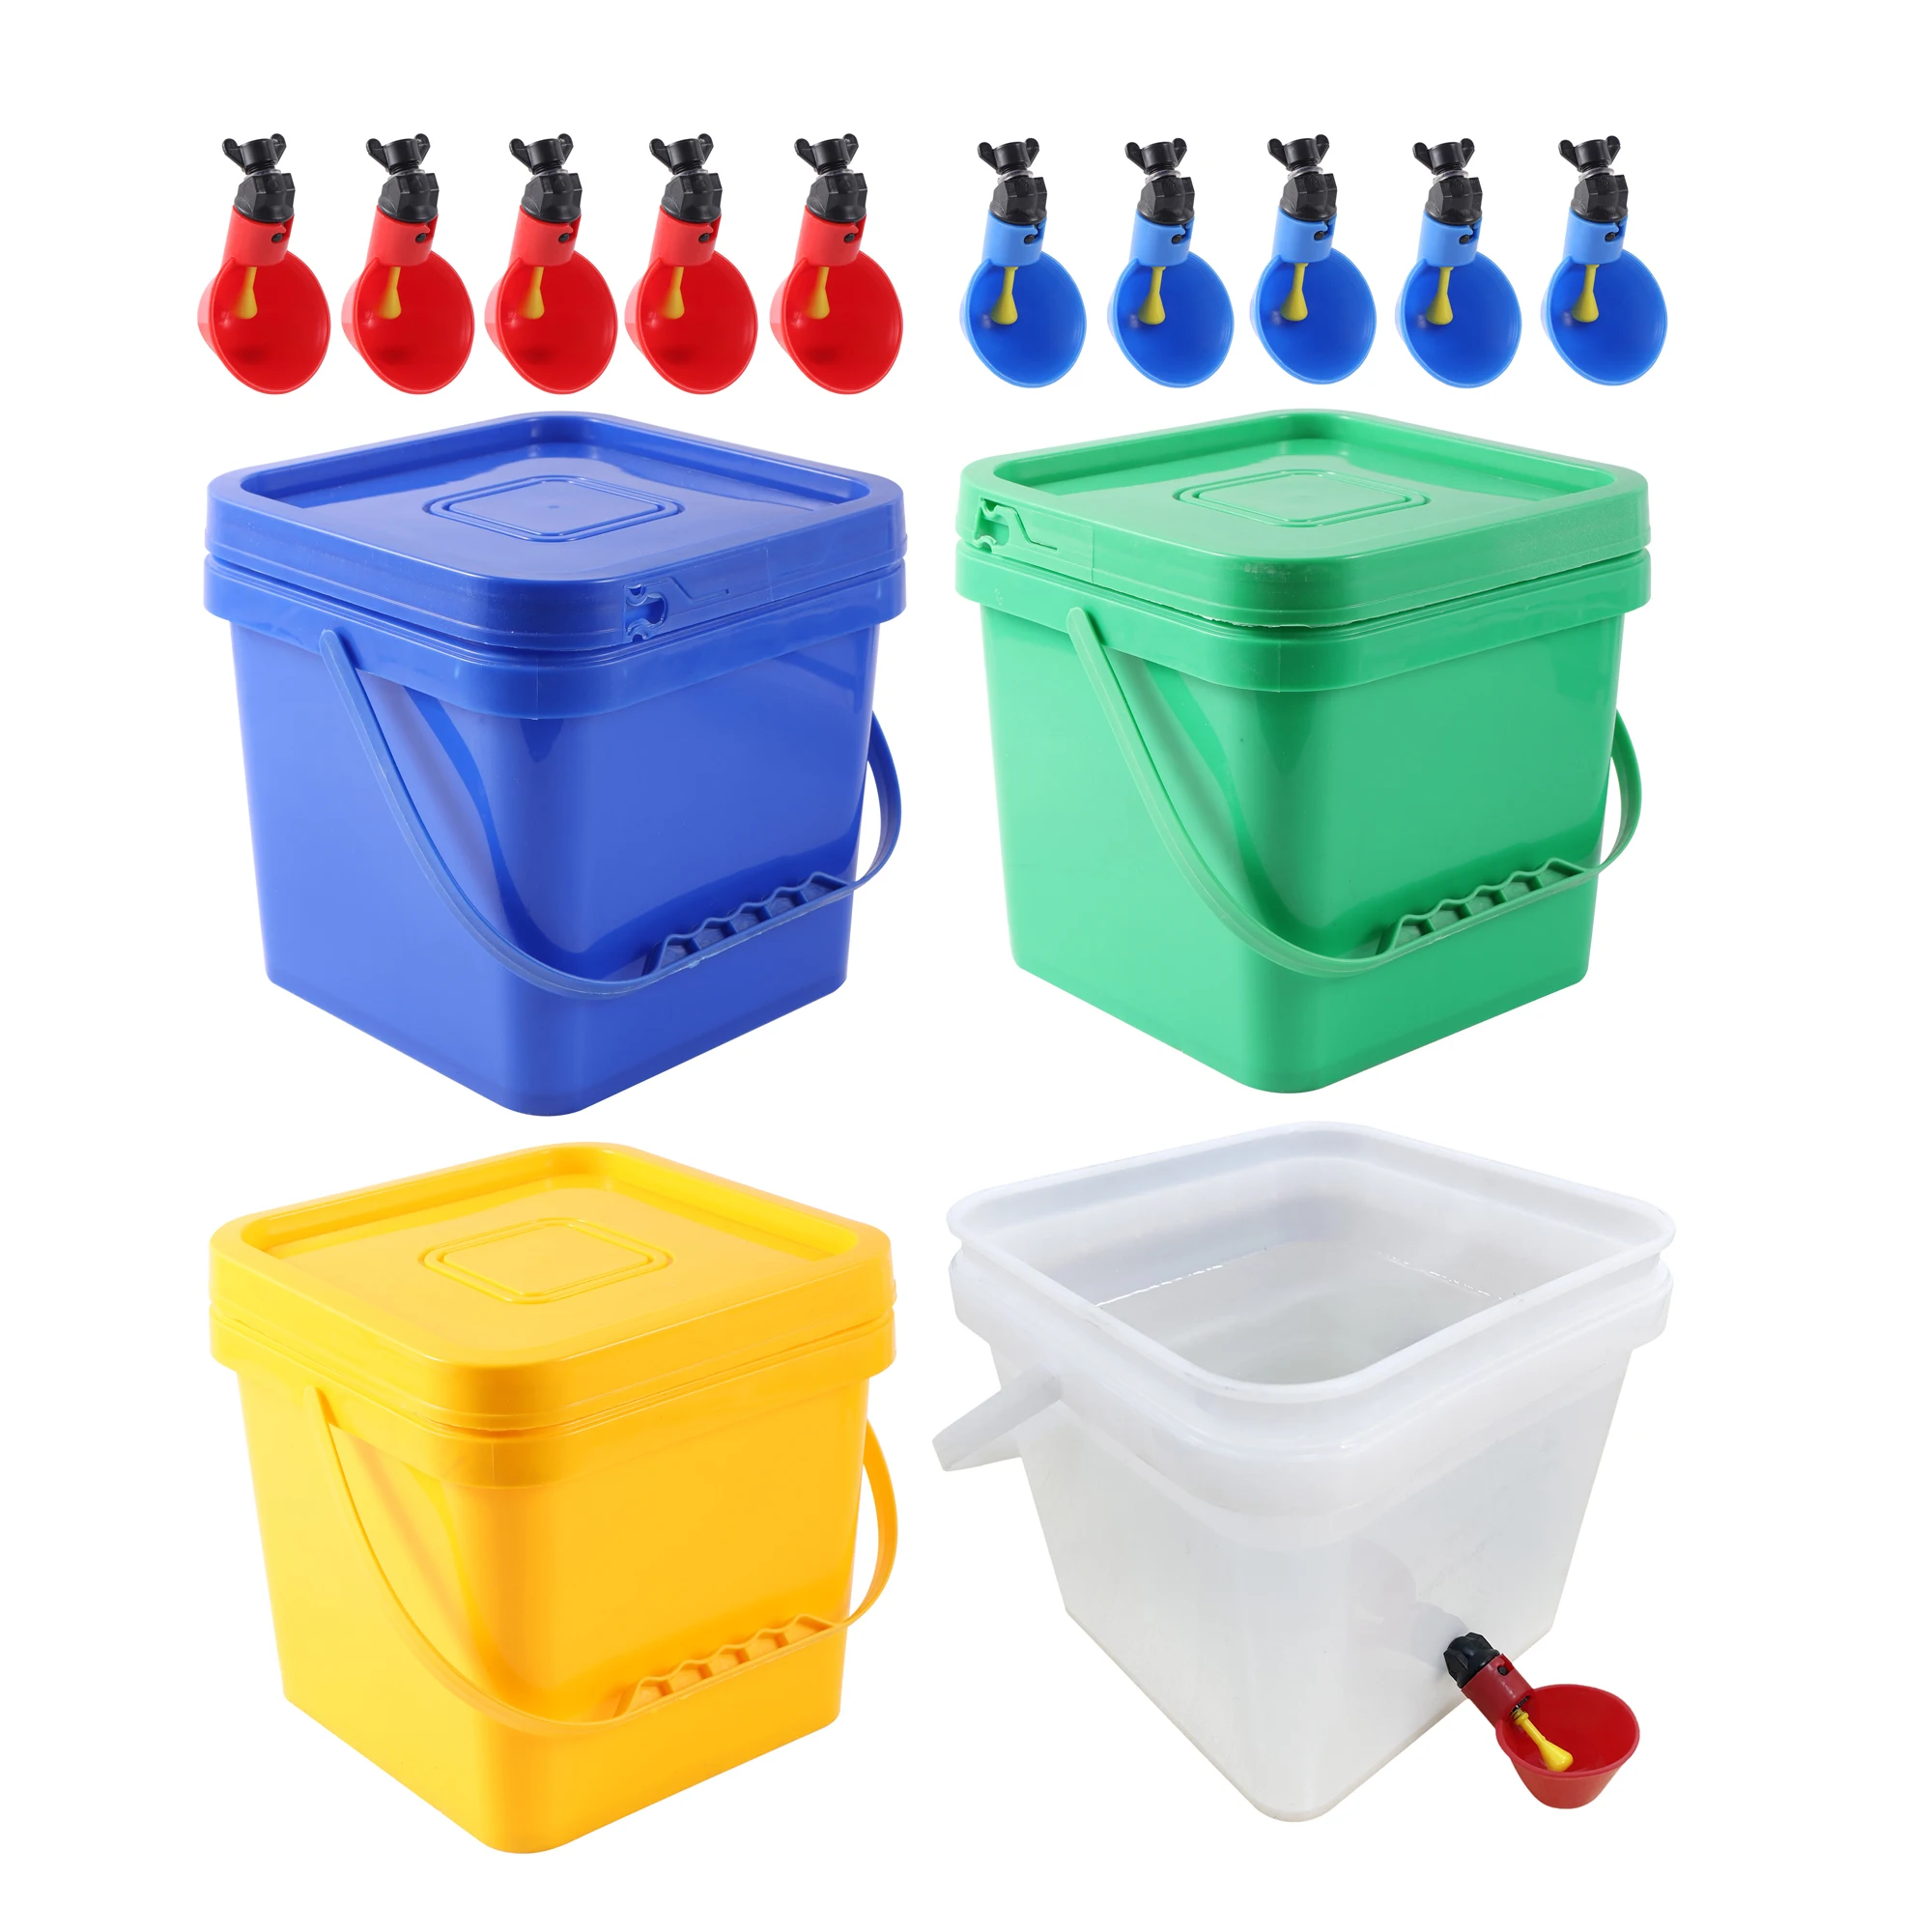 Chicken Drinker Bucket With Chicken Poultry Drinking Cup Animal Farm 5L  Applicable Drinking System For Chicken Quail Bird Tools